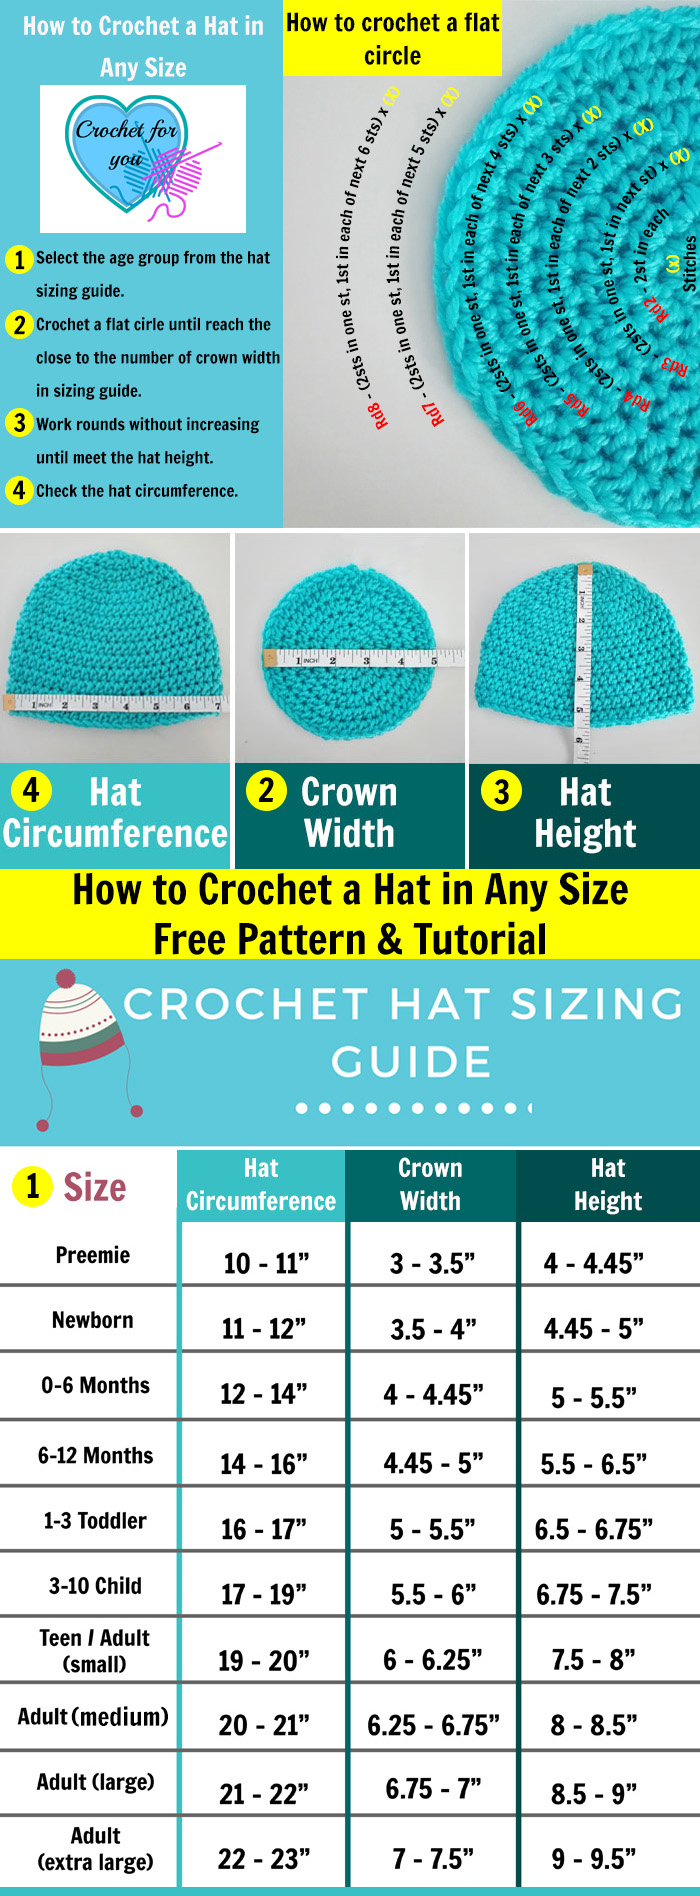 How to Crochet Hat in Any Size free pattern & tutorial